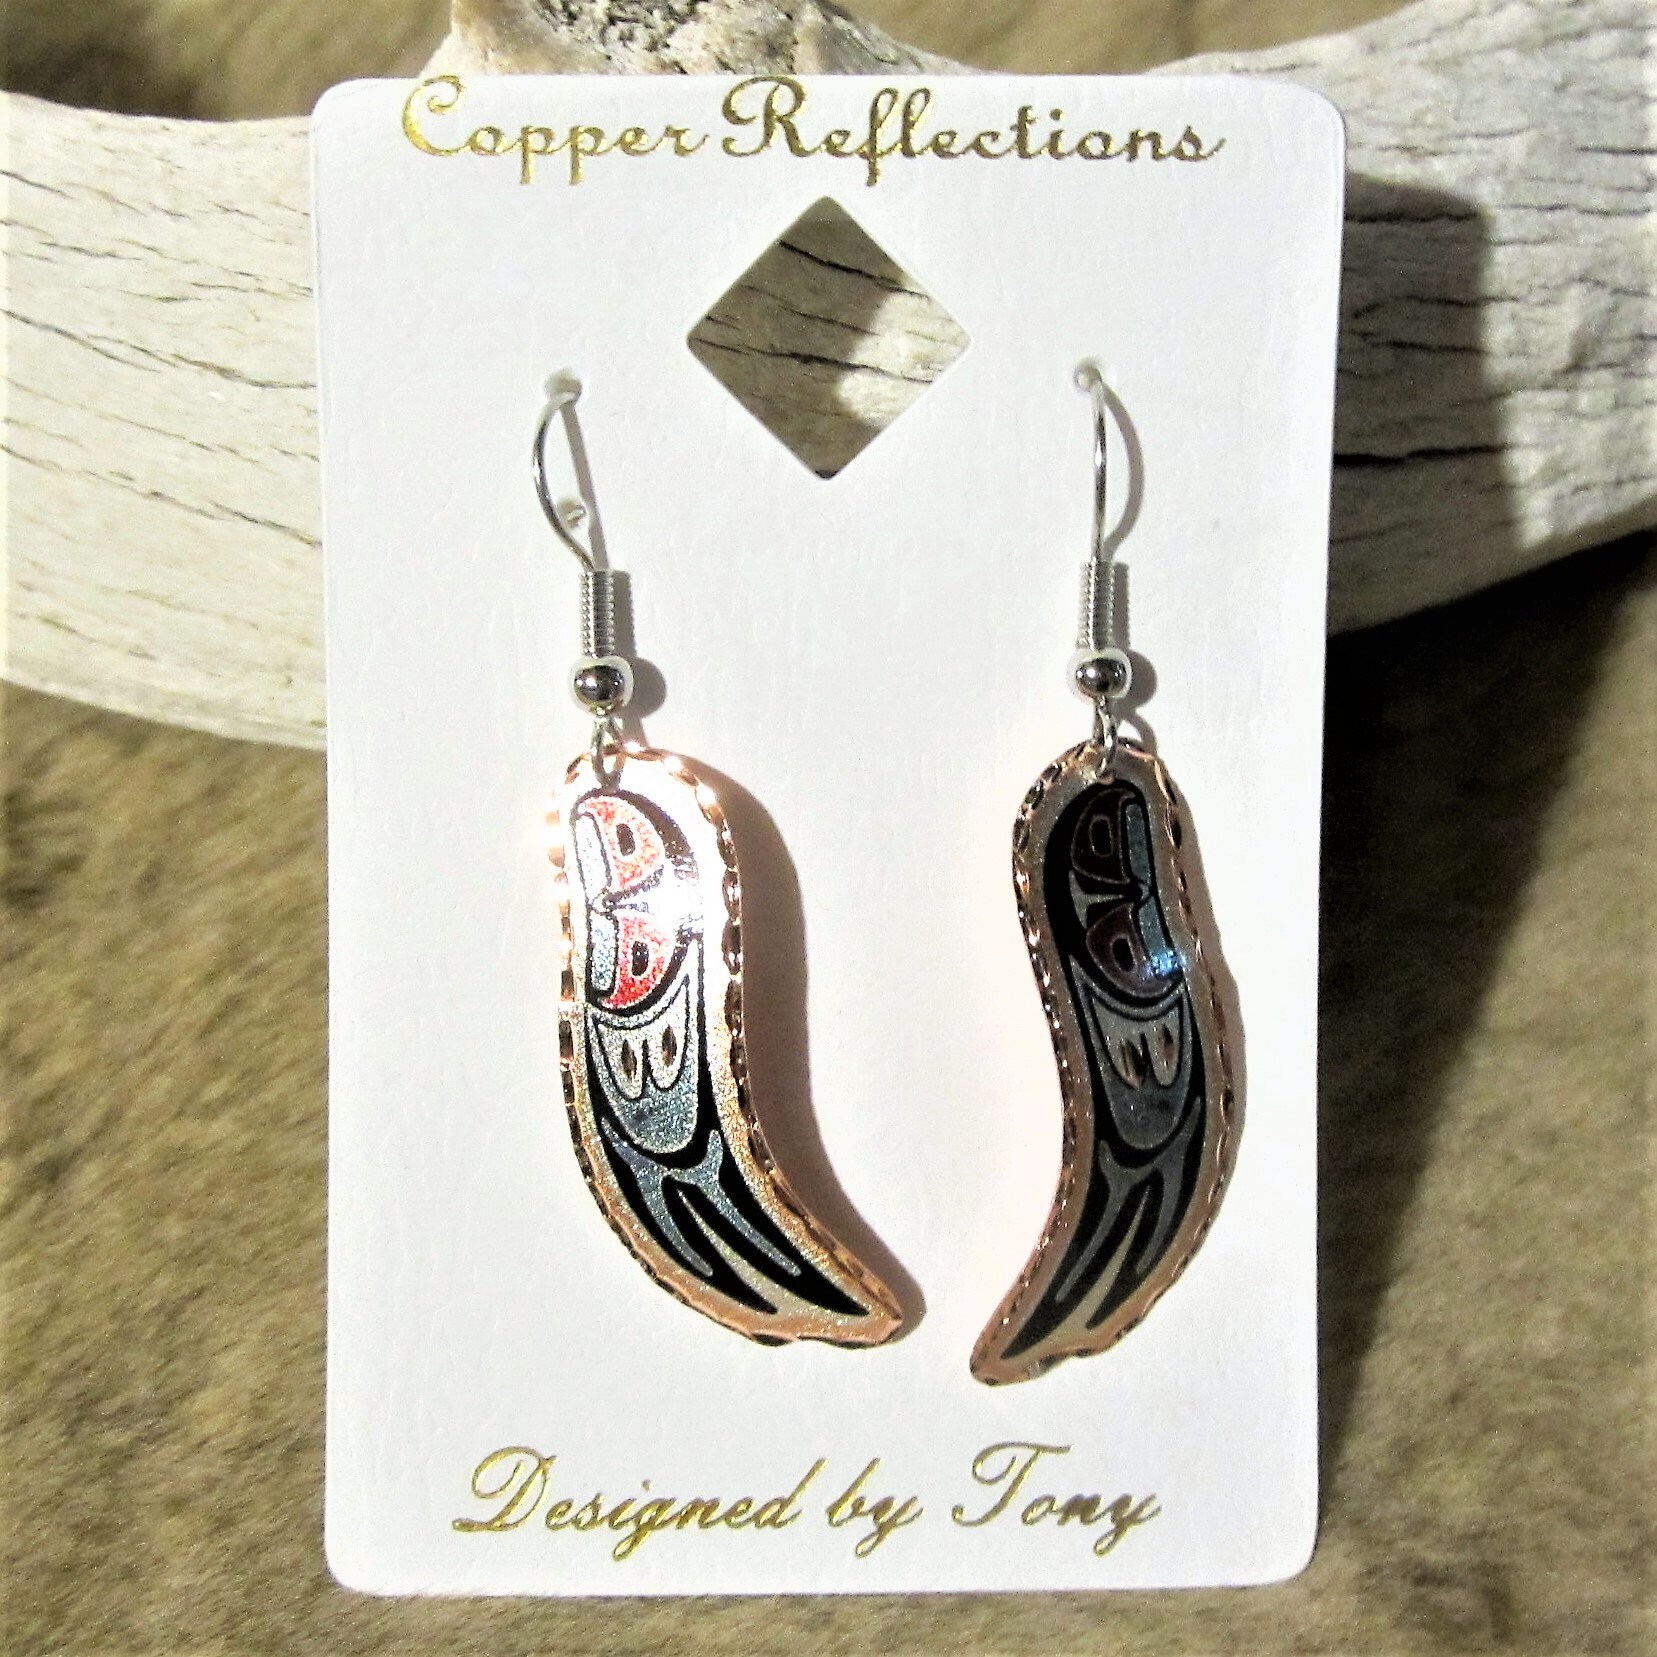 Copper Silver Plate First Nations 'Sea Hawk' Earrings Pacific North West Coast Native Indigenous Art Jewelry